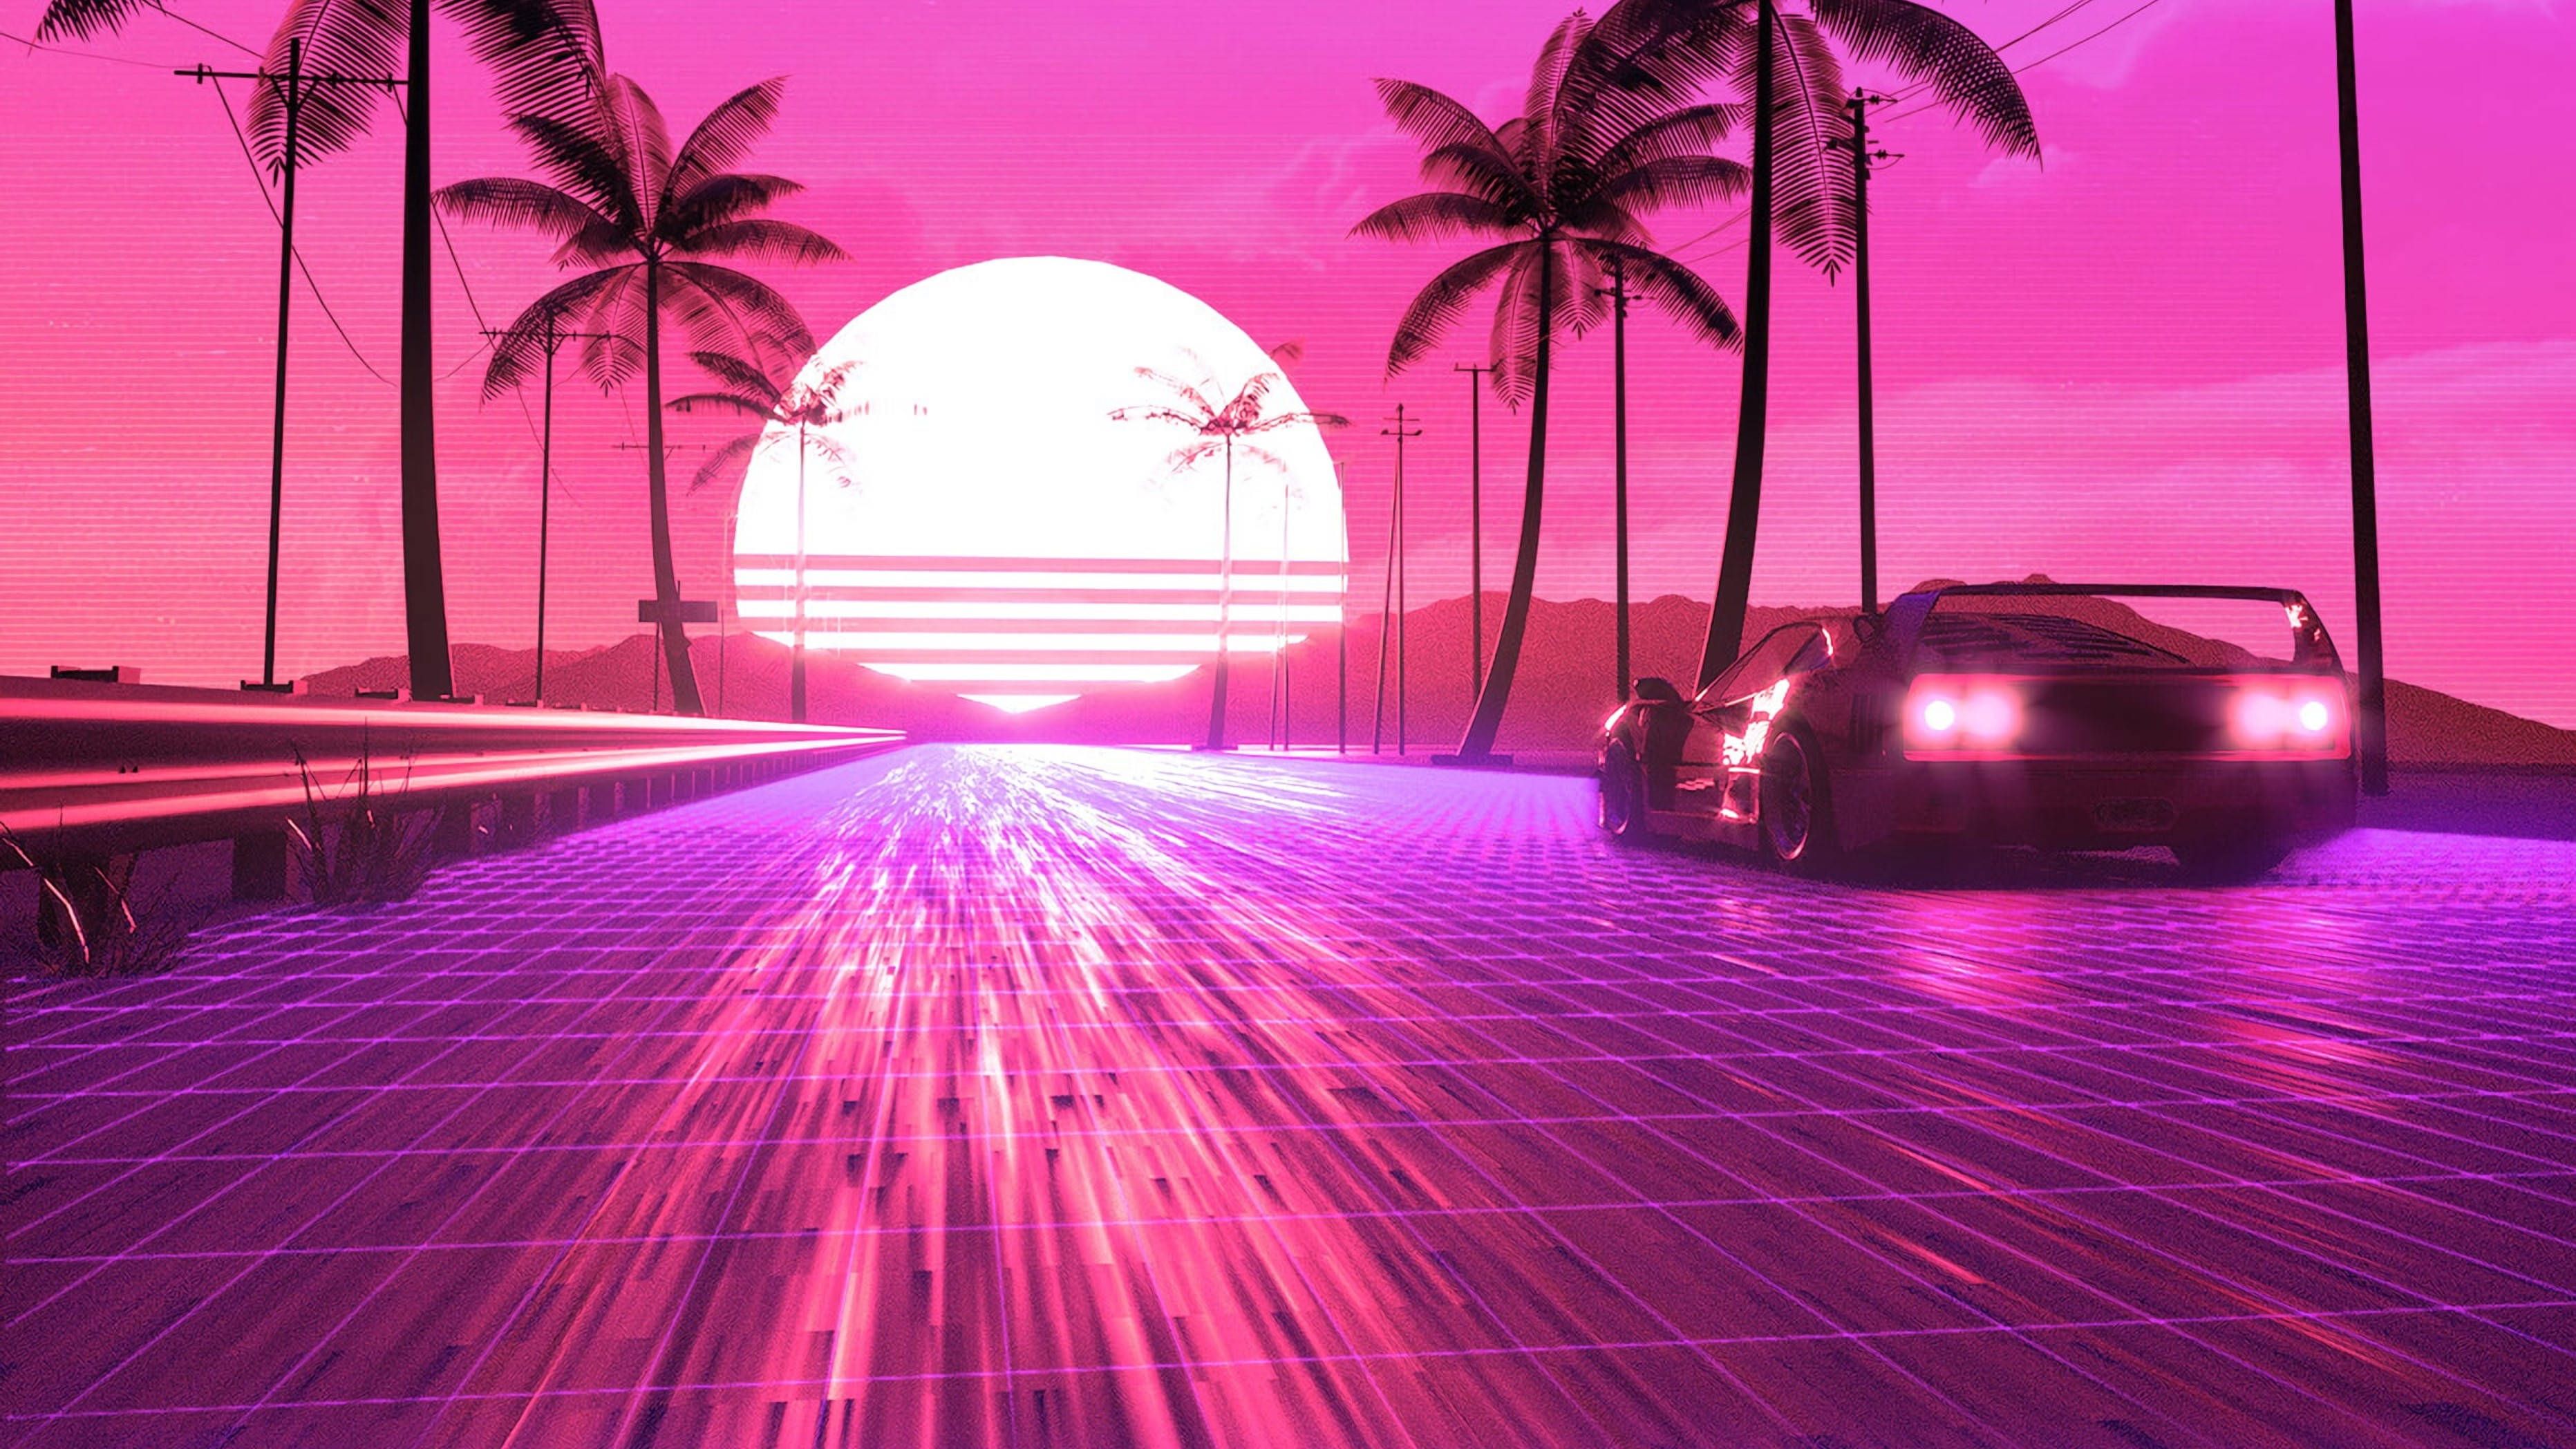 A car driving down the road in neon colors - Neon pink